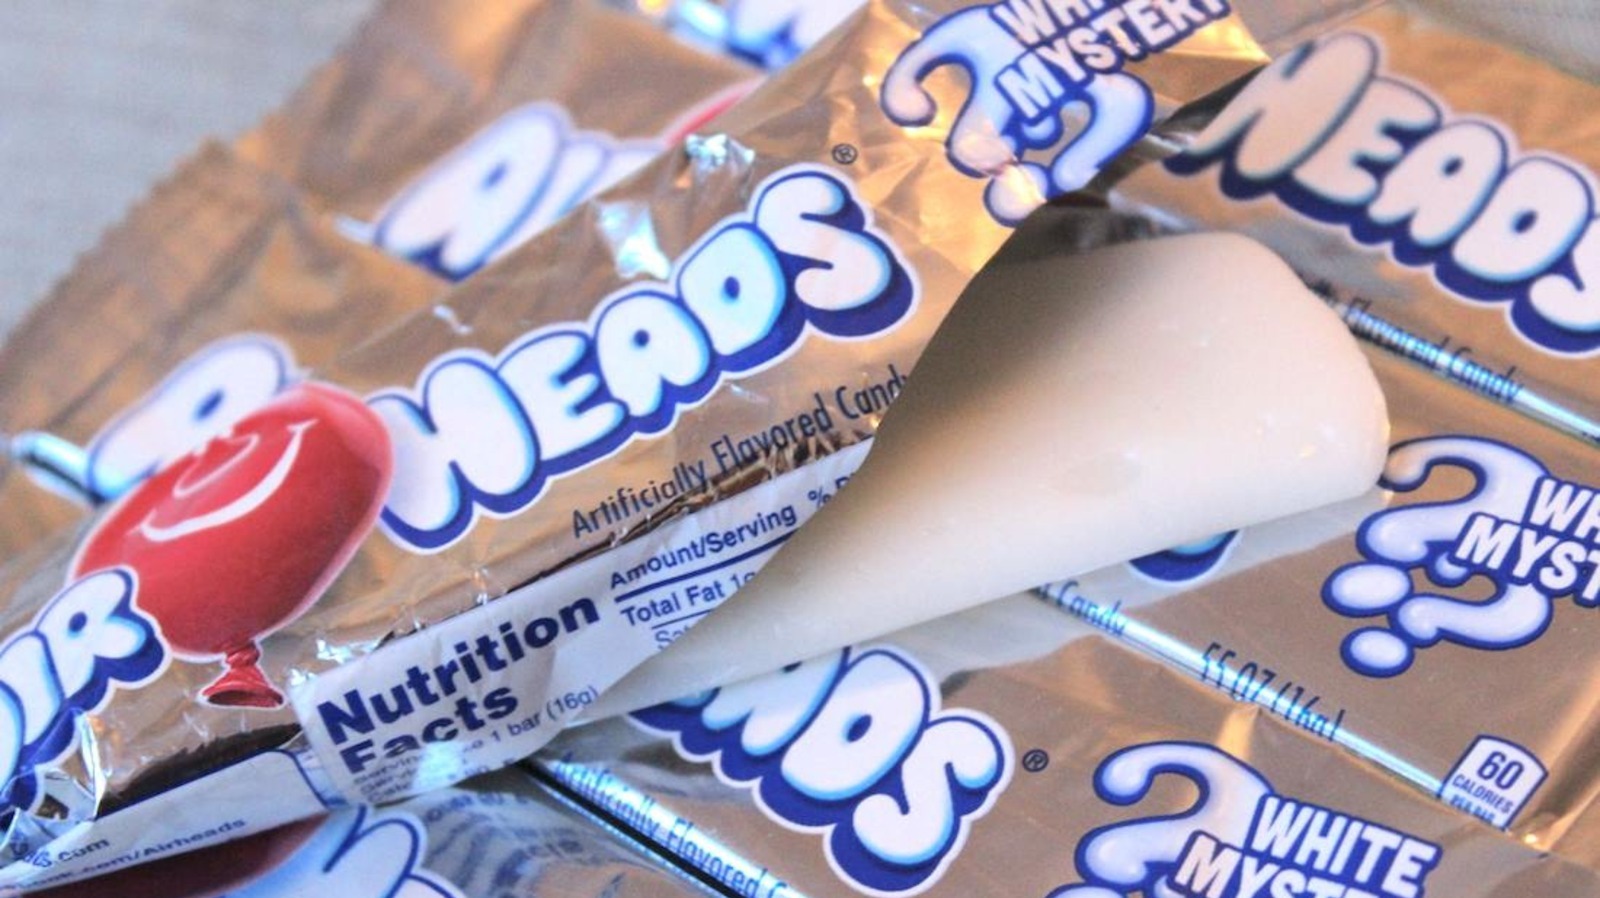 What Exactly Is The Airheads Mystery Flavor?